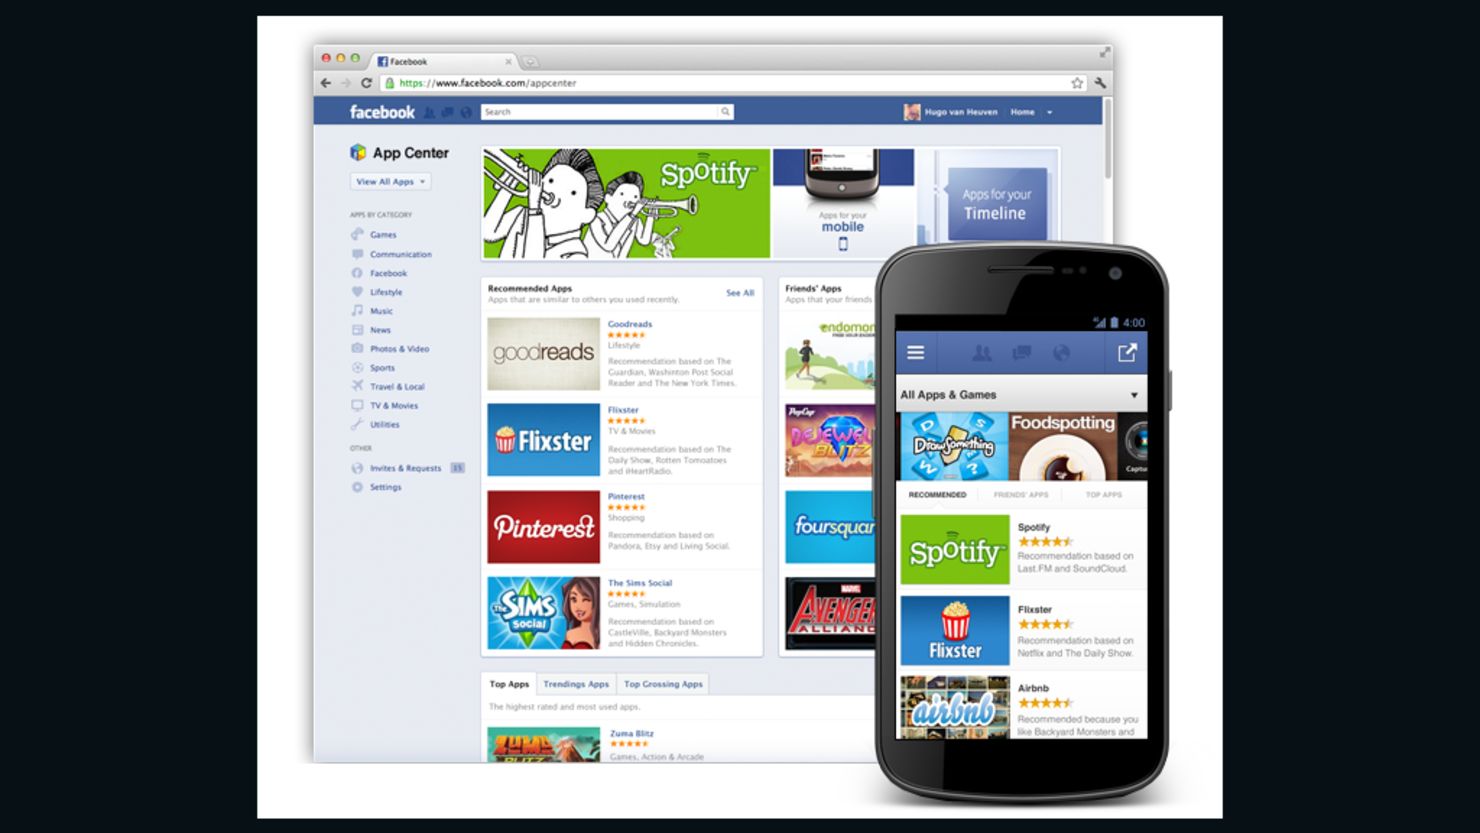 Facebook's new App Center will let users find free and paid apps that run on the networking site.